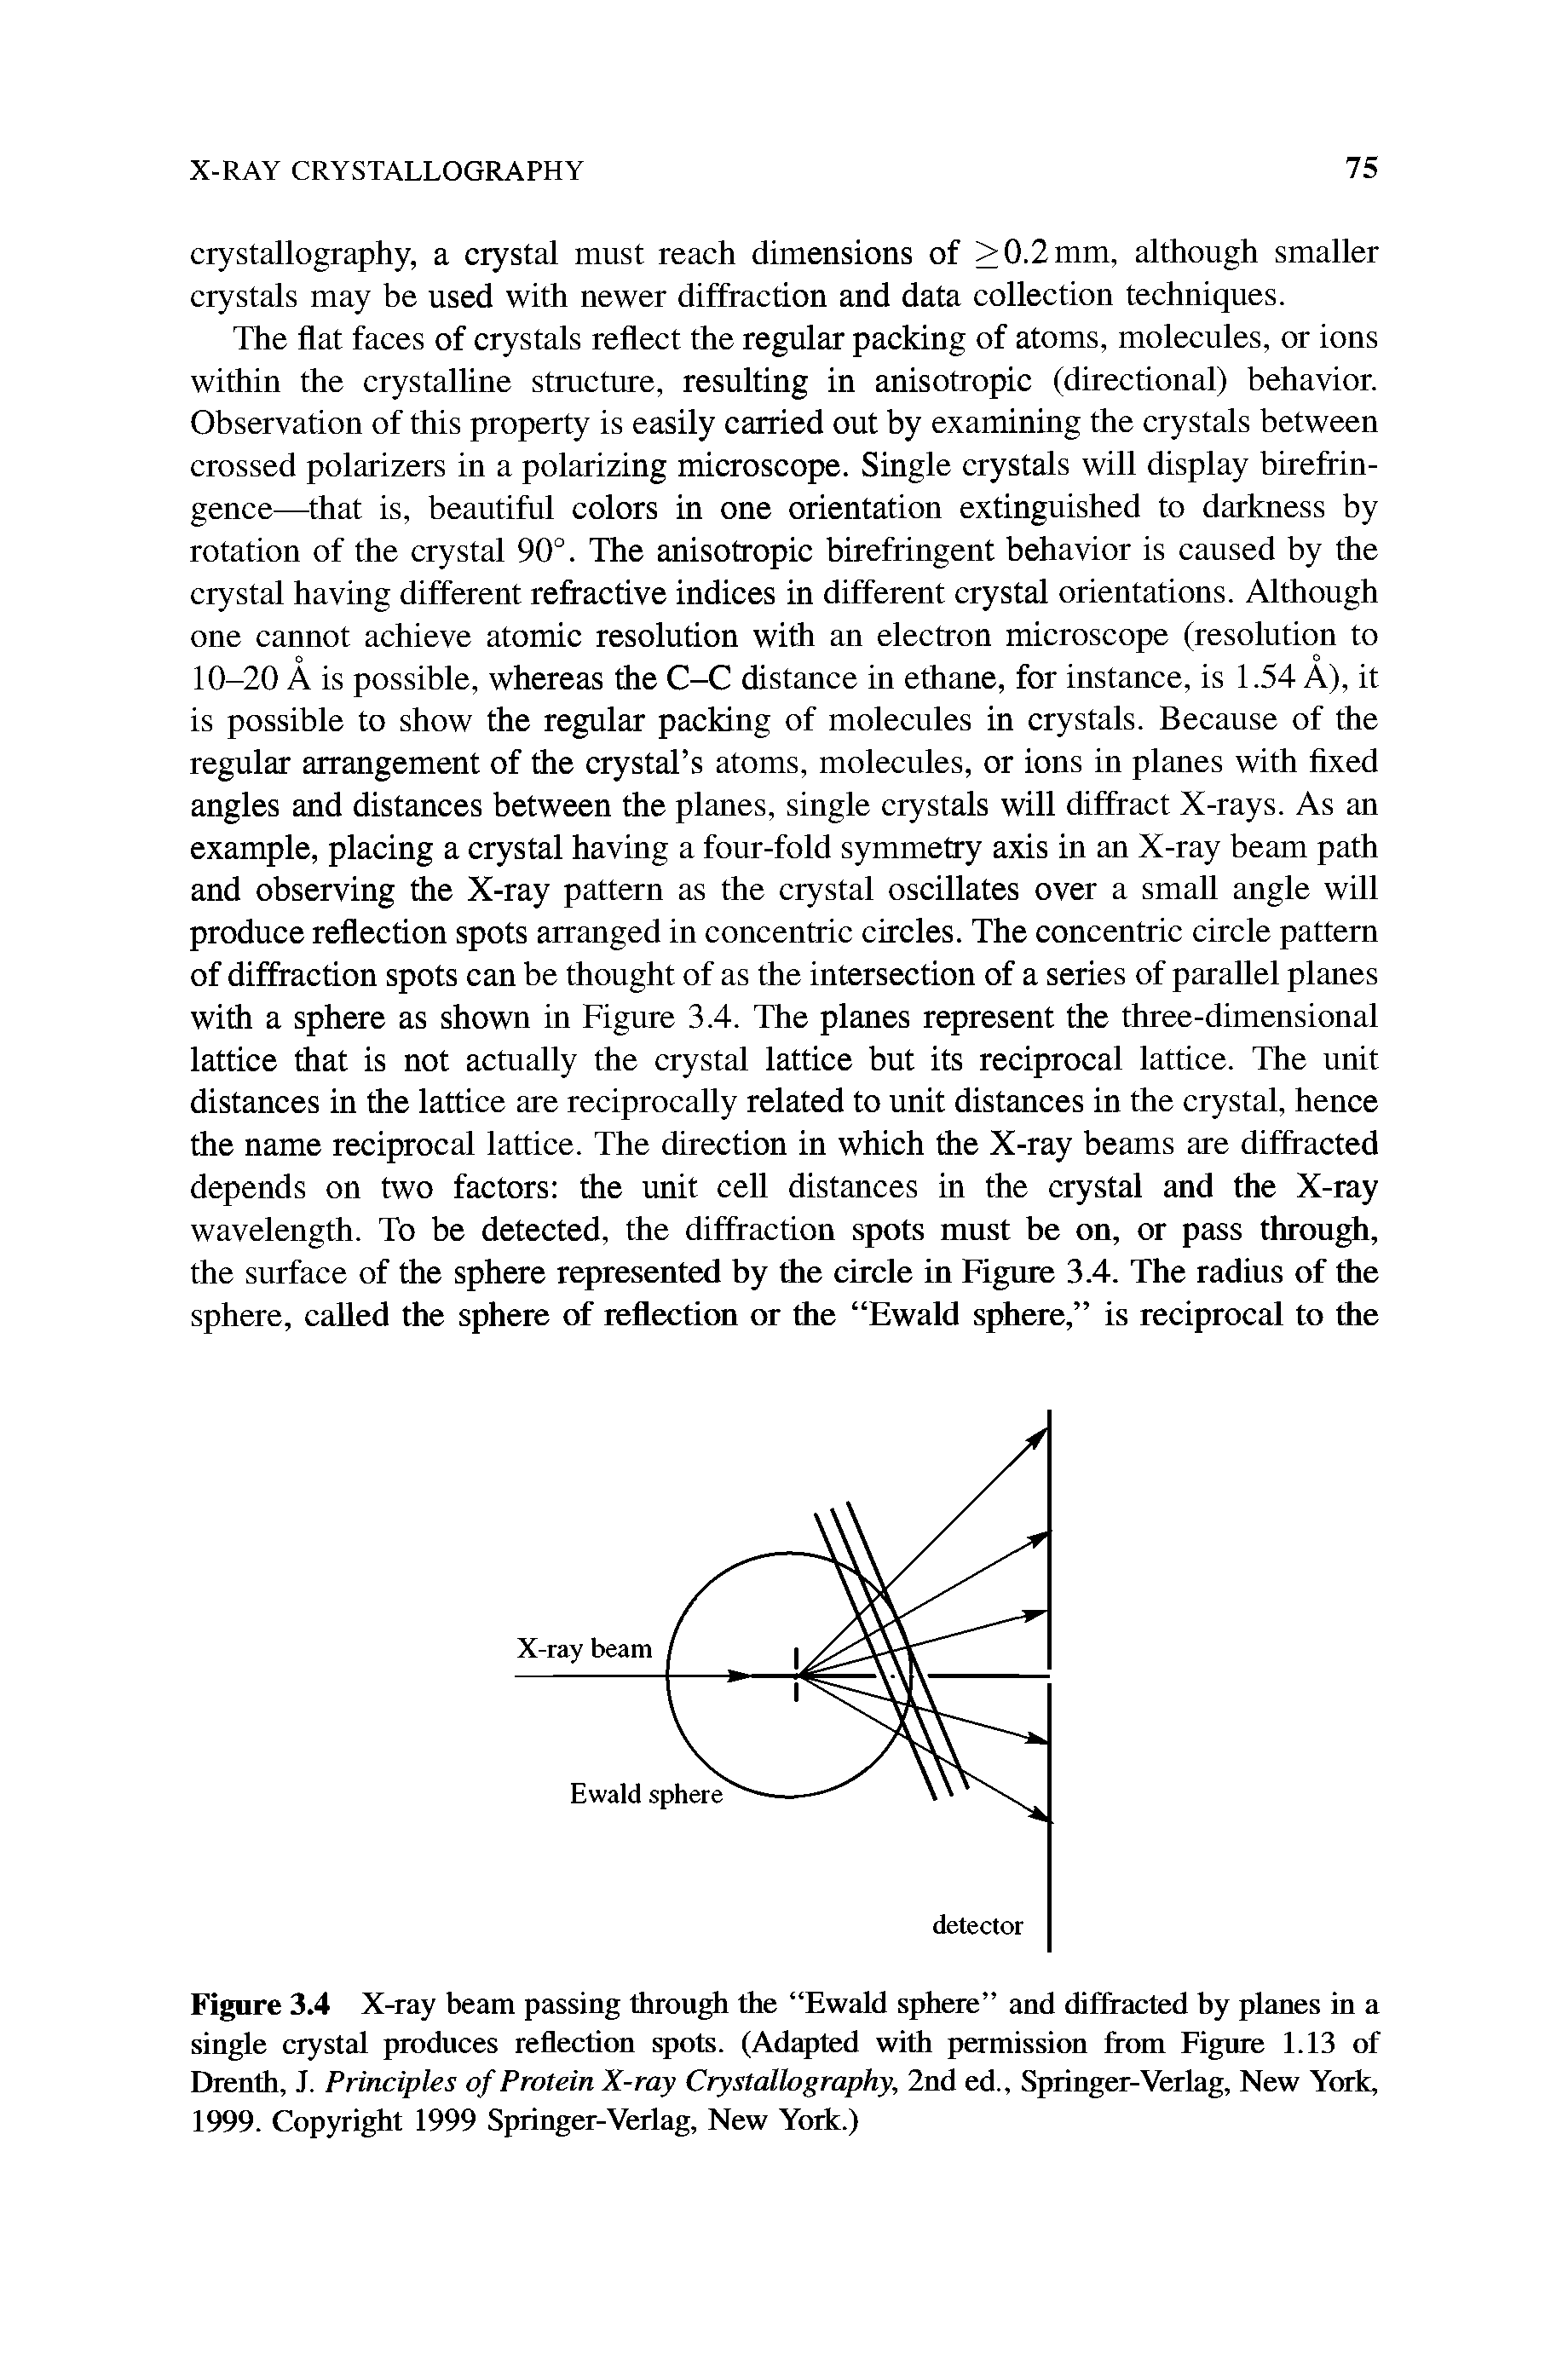 Figure 3.4 X-ray beam passing through the Ewald sphere and diffracted by planes in a single crystal produces reflection spots. (Adapted with permission from Figure 1.13 of Drenth, J. Principles of Protein X-ray Crystallography, 2nd ed., Springer-Verlag, New York, 1999. Copyright 1999 Springer-Verlag, New York.)...